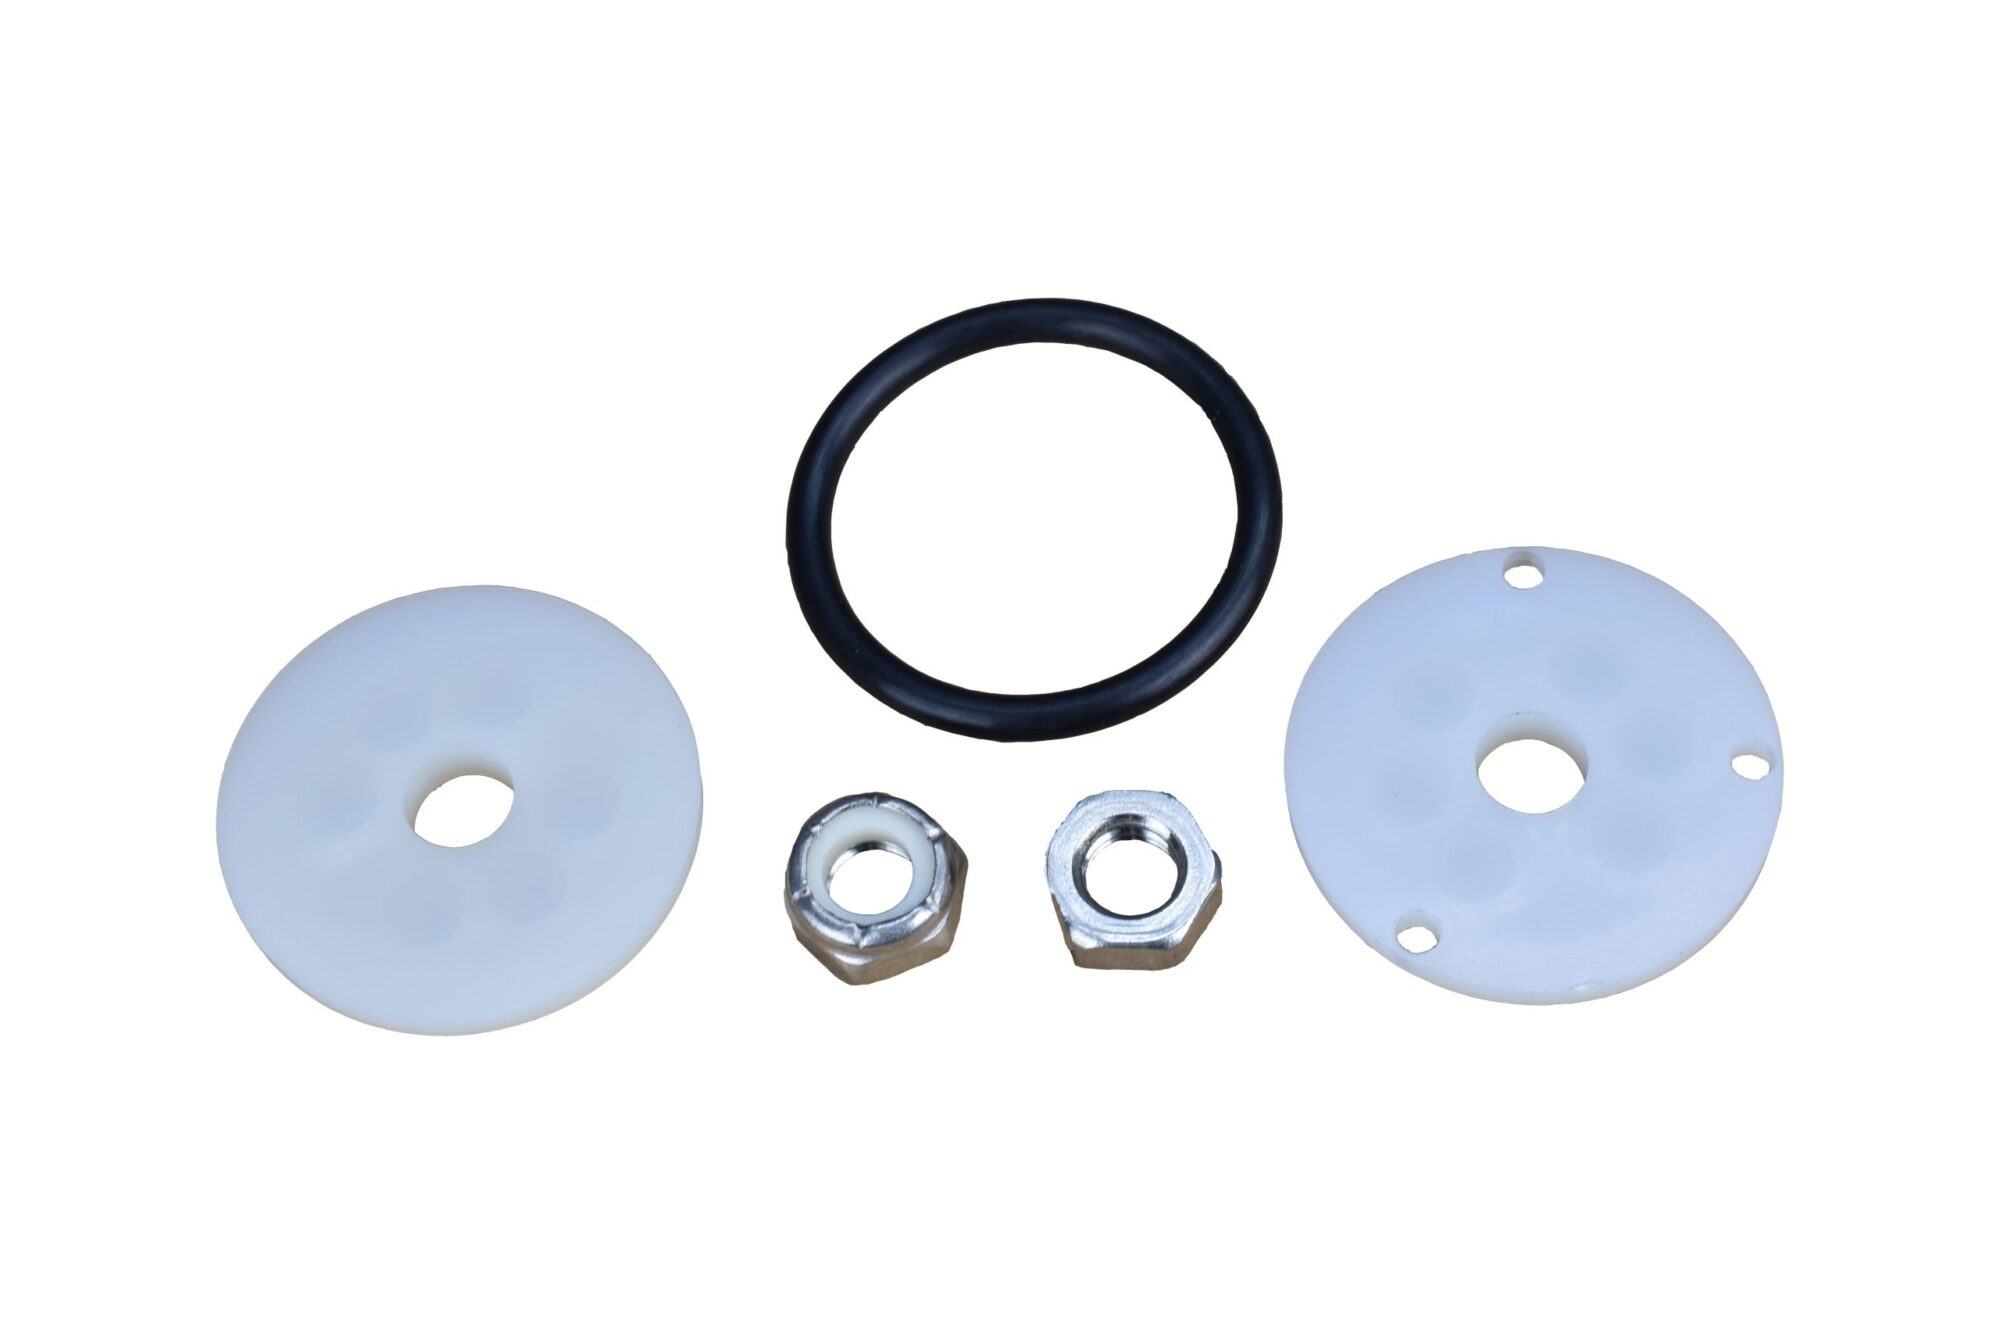 Z0234DA Disc Assembly for Pump Shaft - Includes 2 Plastic Discs, #29 Washer and Both Nuts